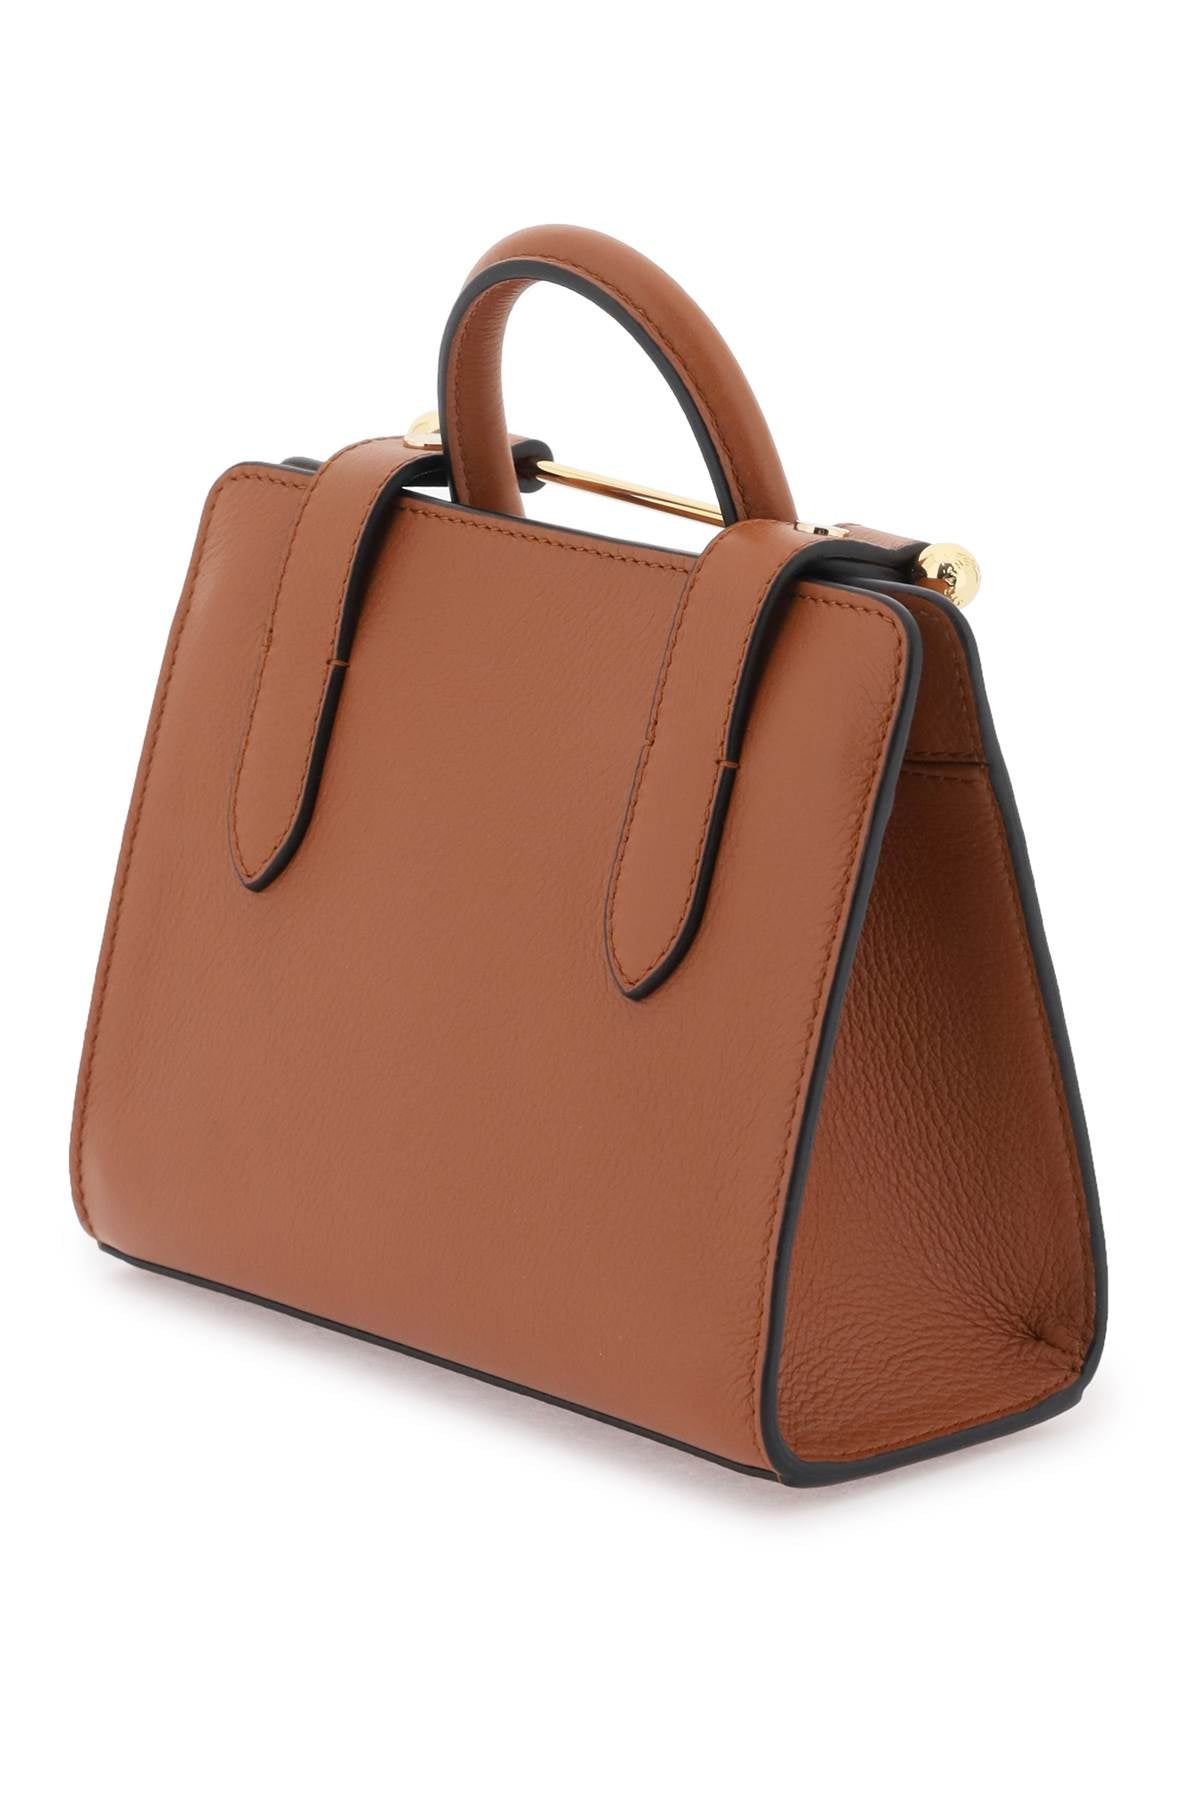 Strathberry Leather Nano Tote Bag